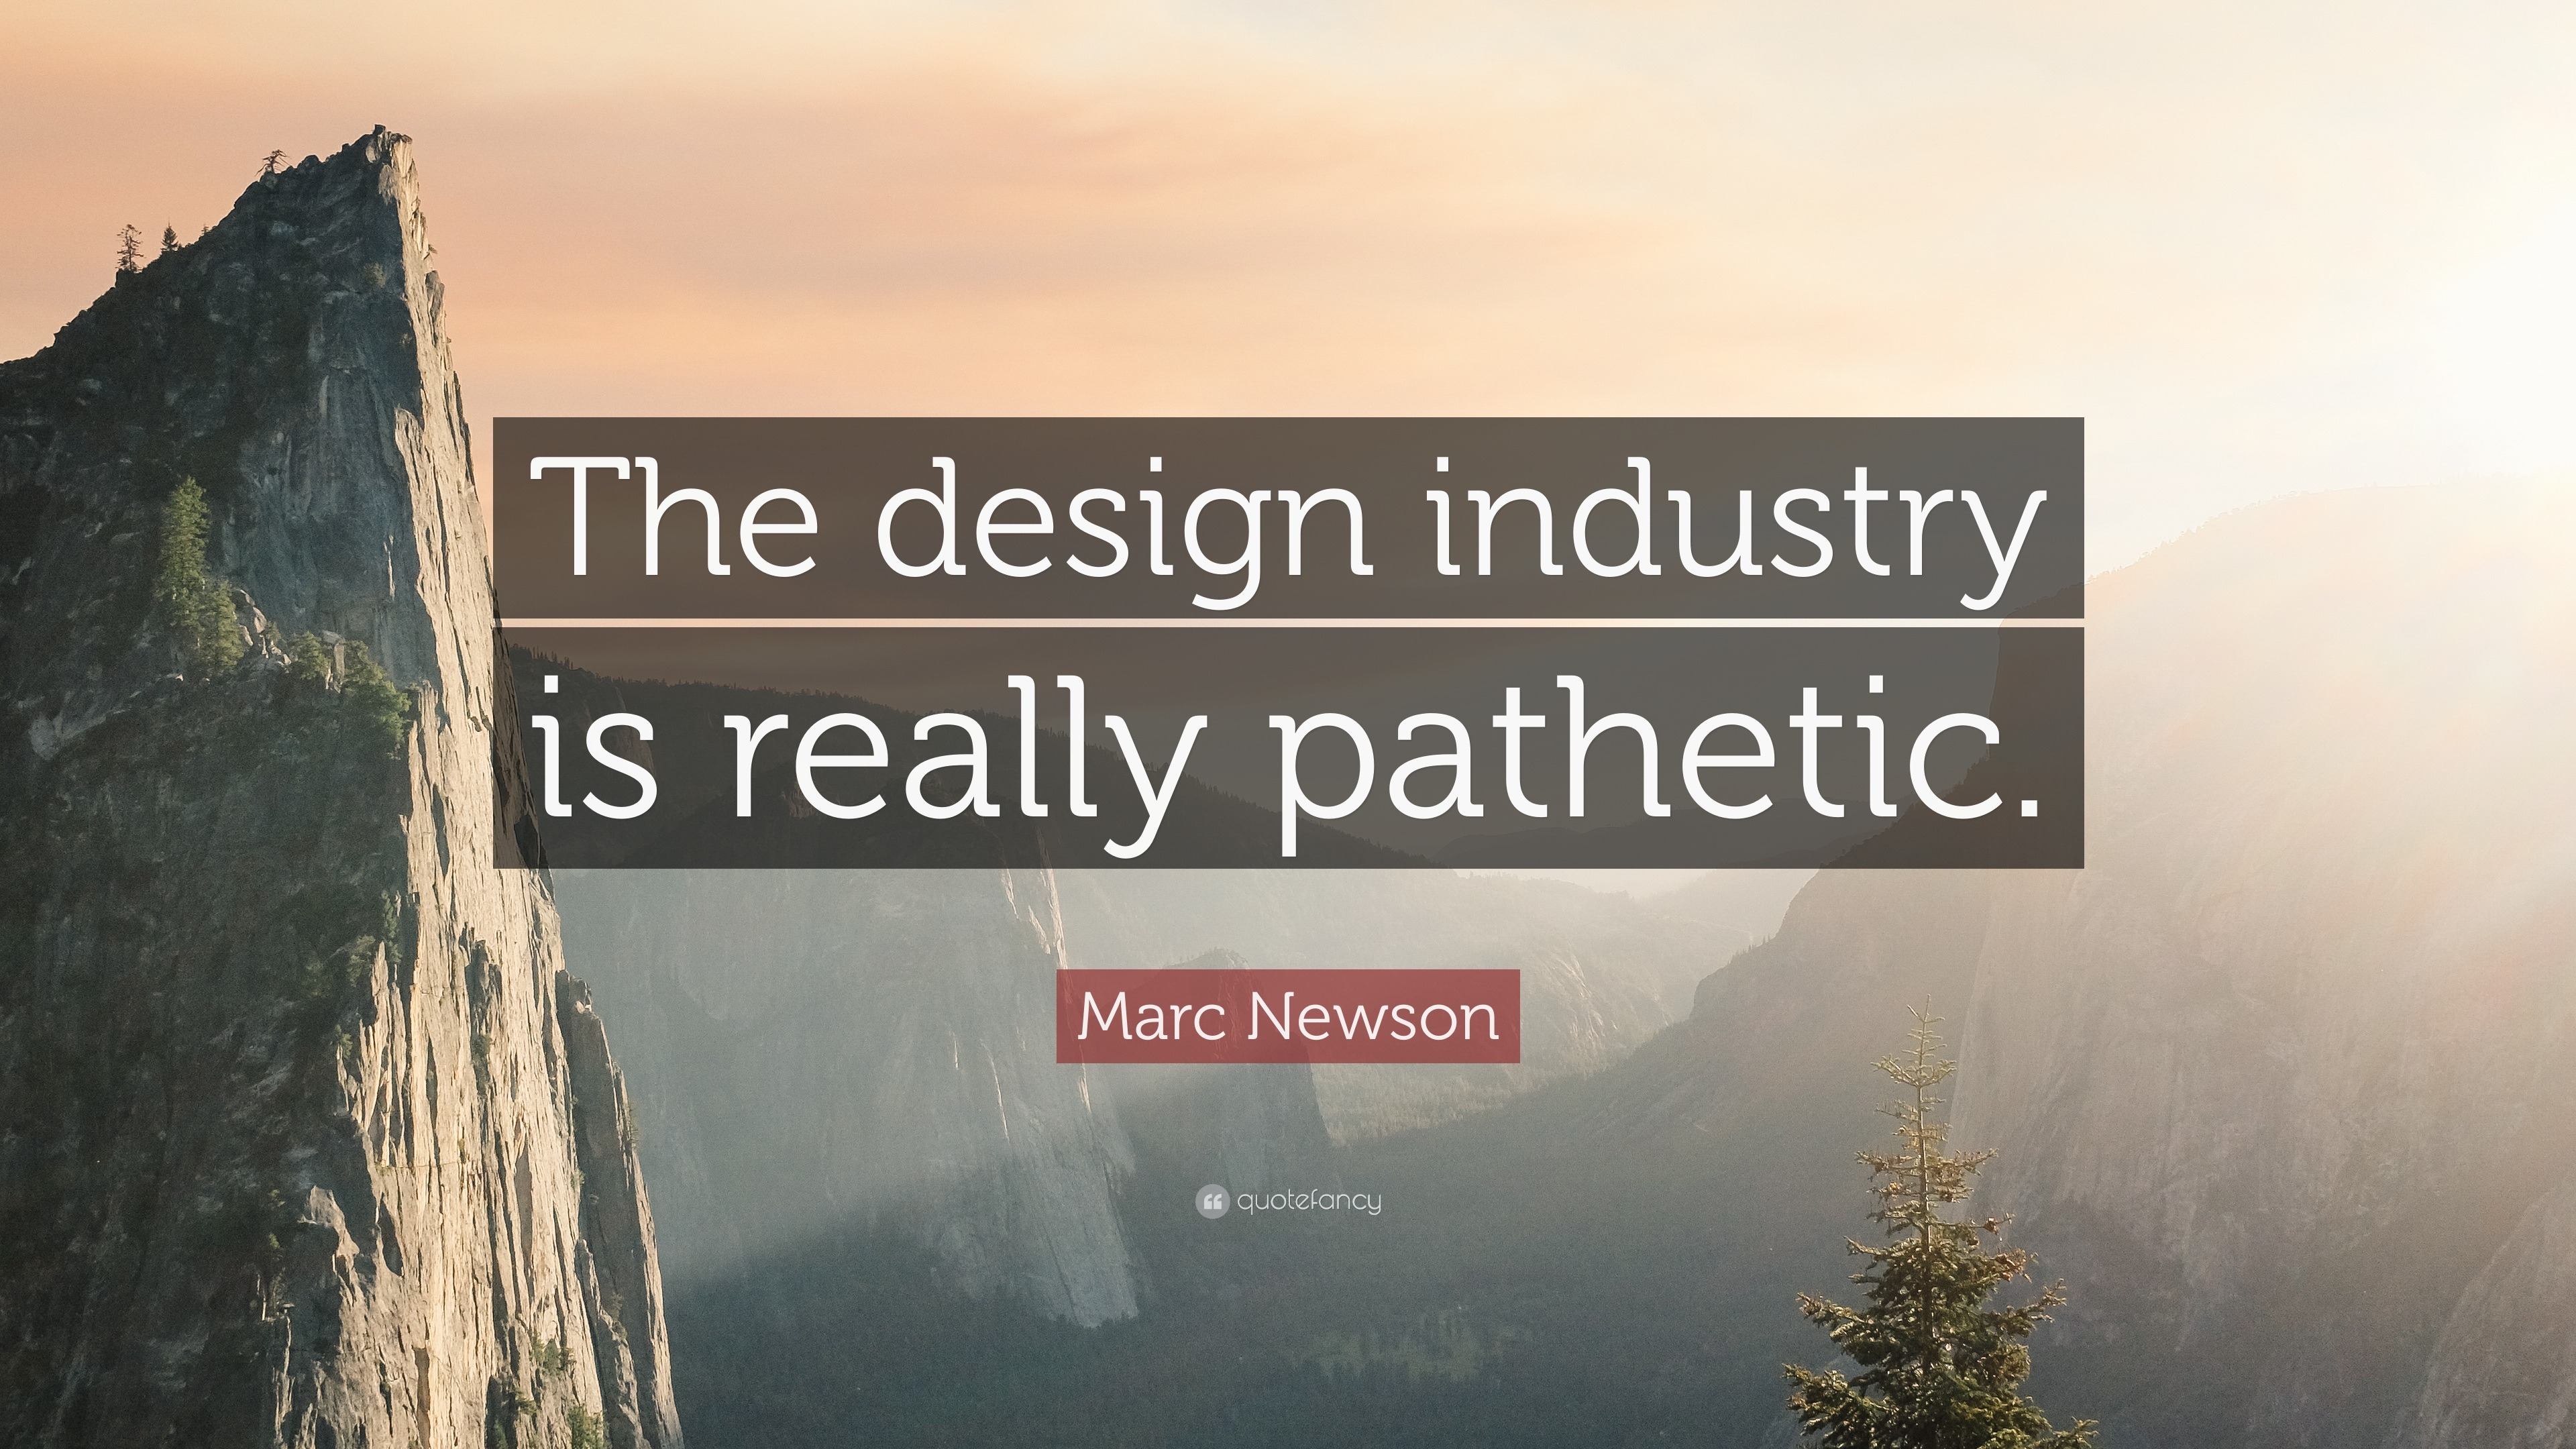 The design industry is really pathetic, says designer Marc Newson